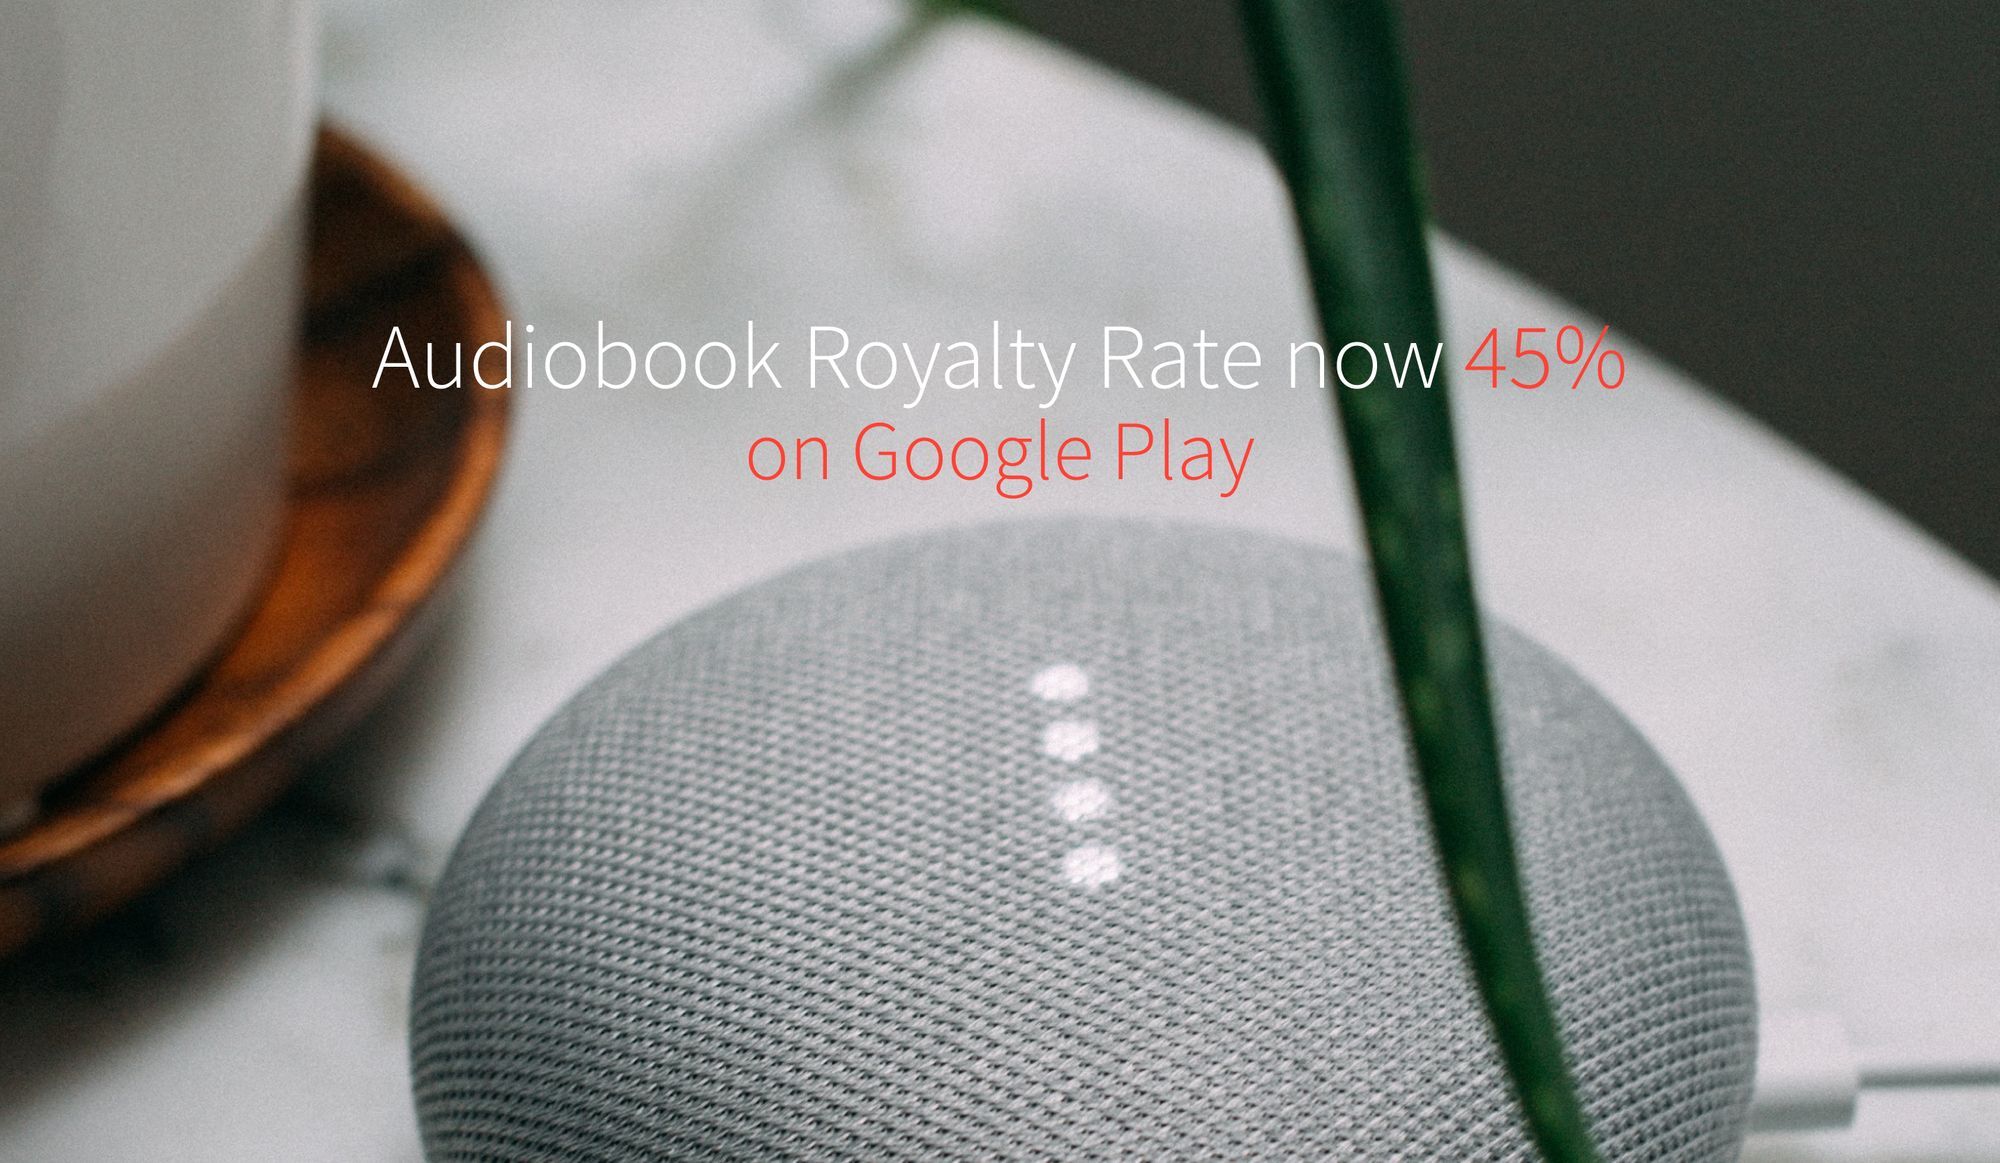 Distribution Update: Google Play Royalty Rate Increase